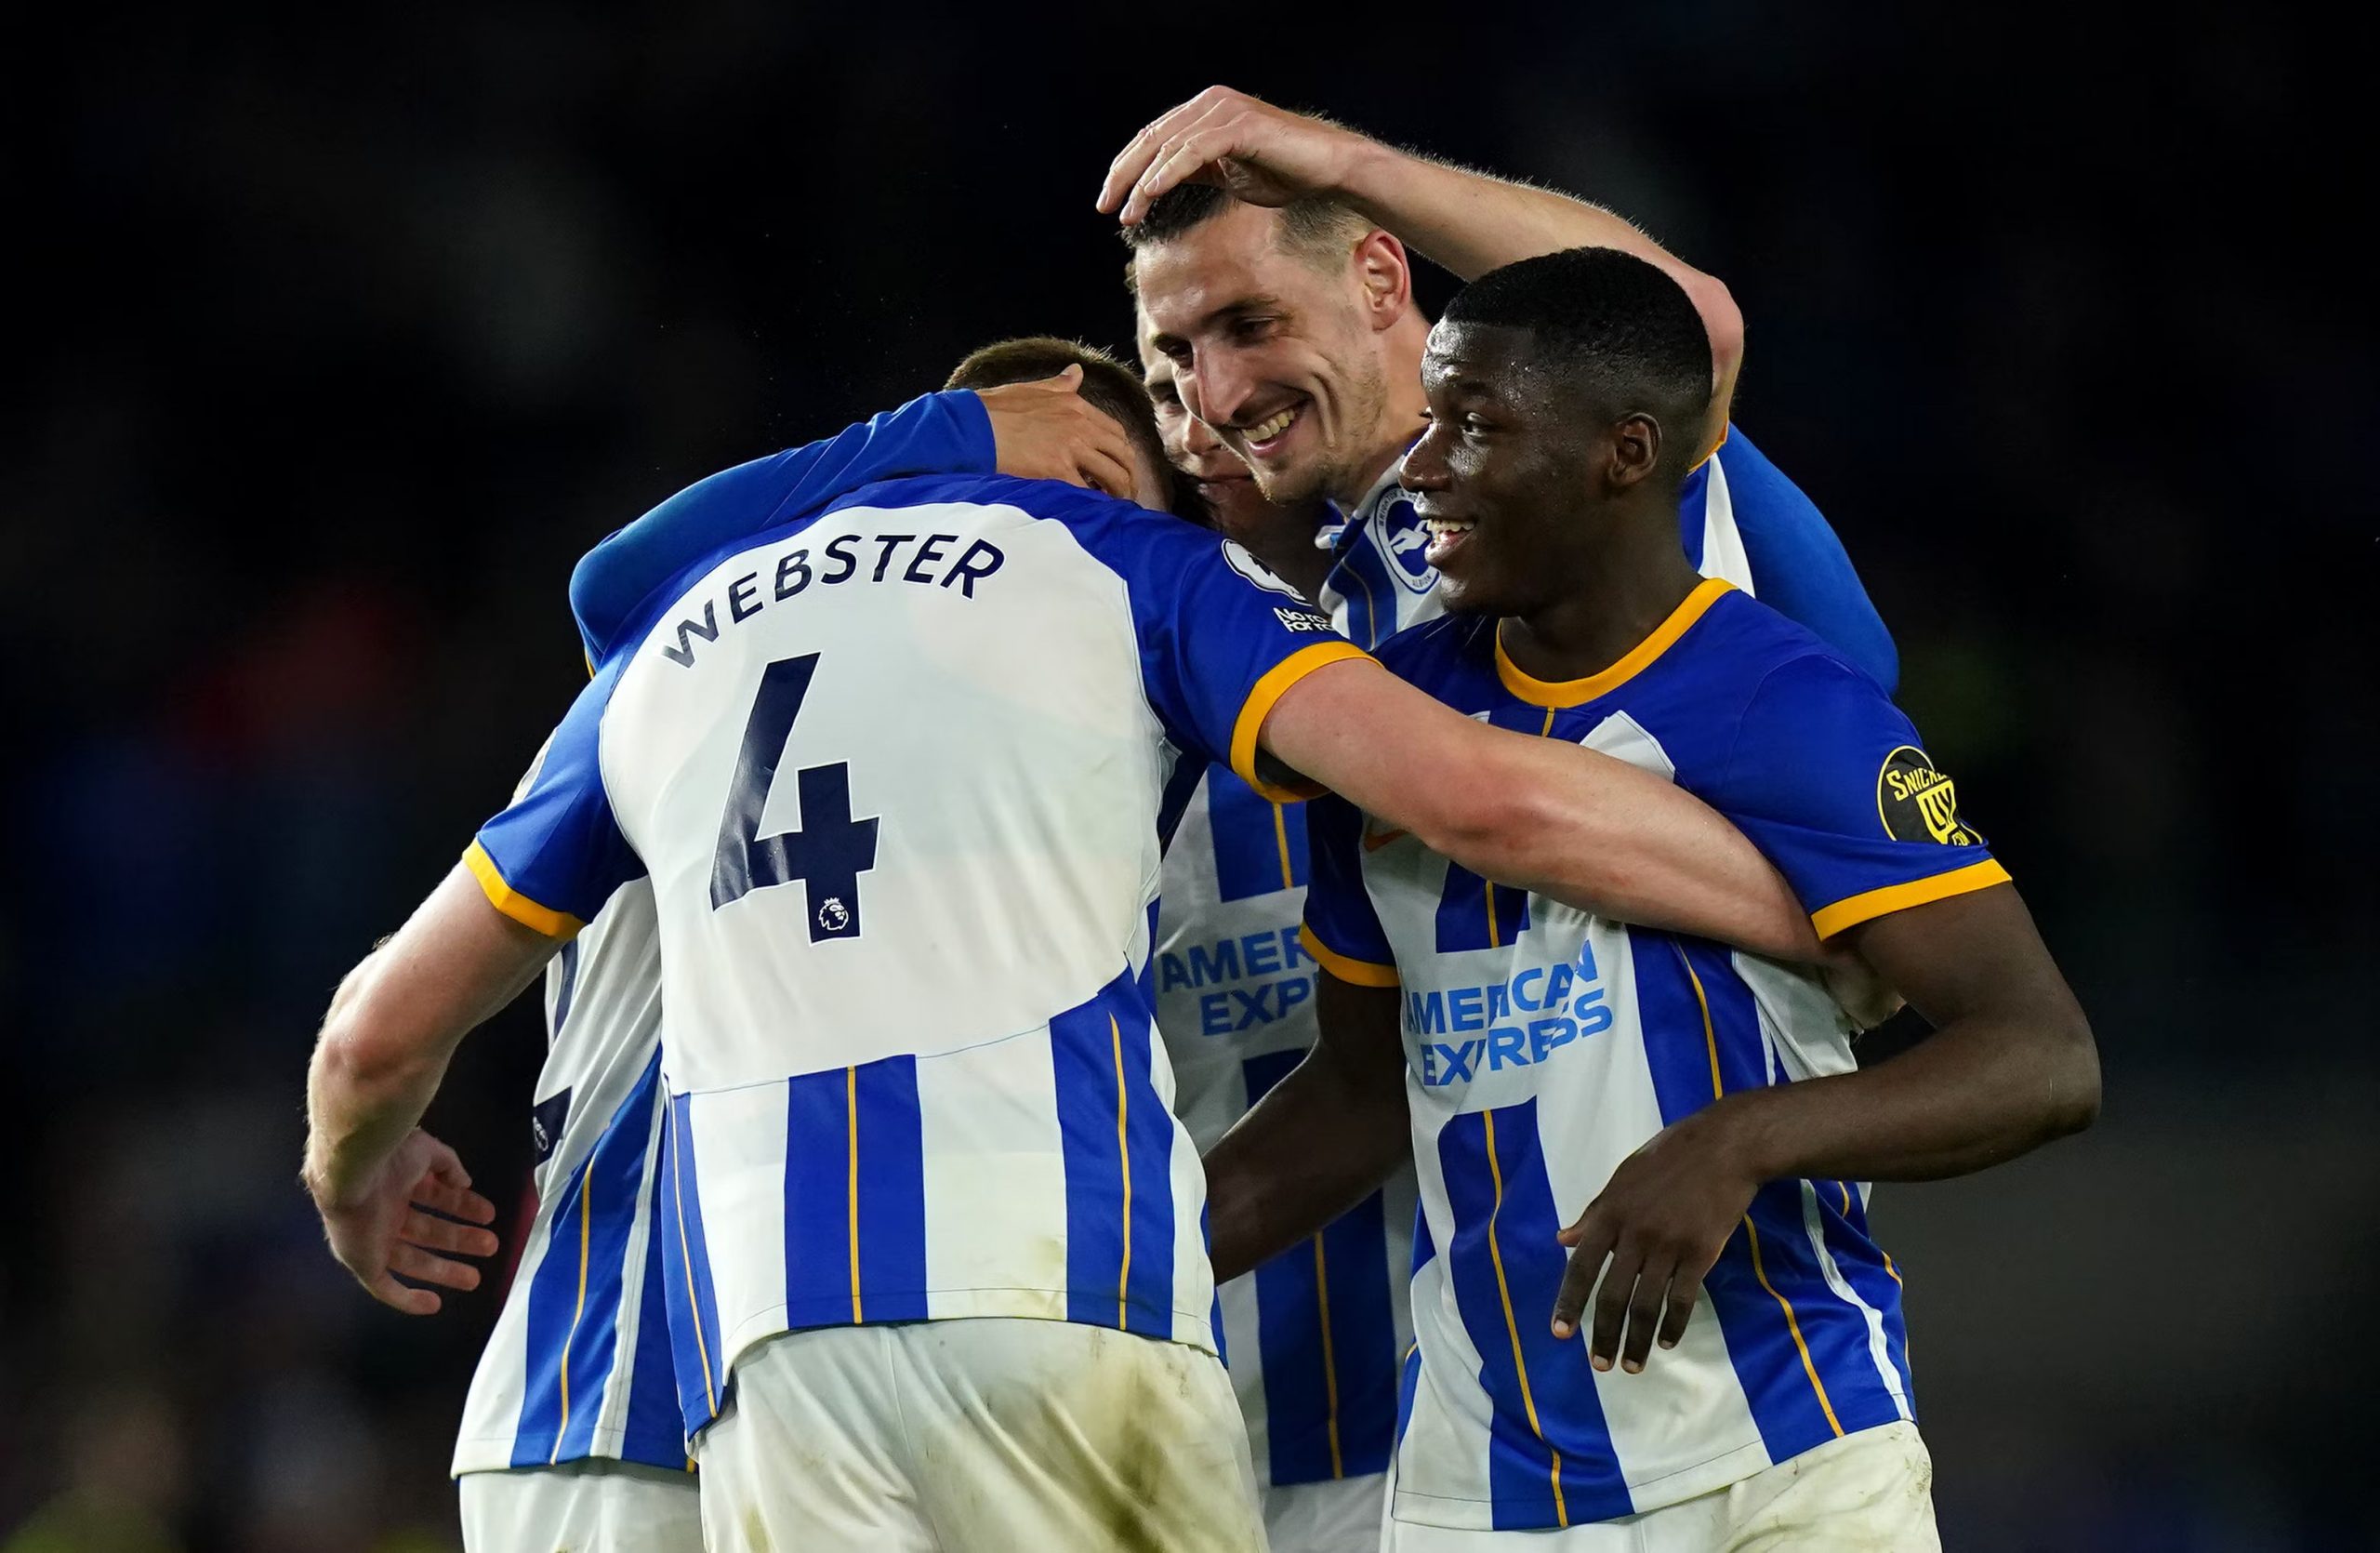 Brighton vs Man Utd LIVE: Result and reaction from Premier League clash as Mac Allister scores late penalty